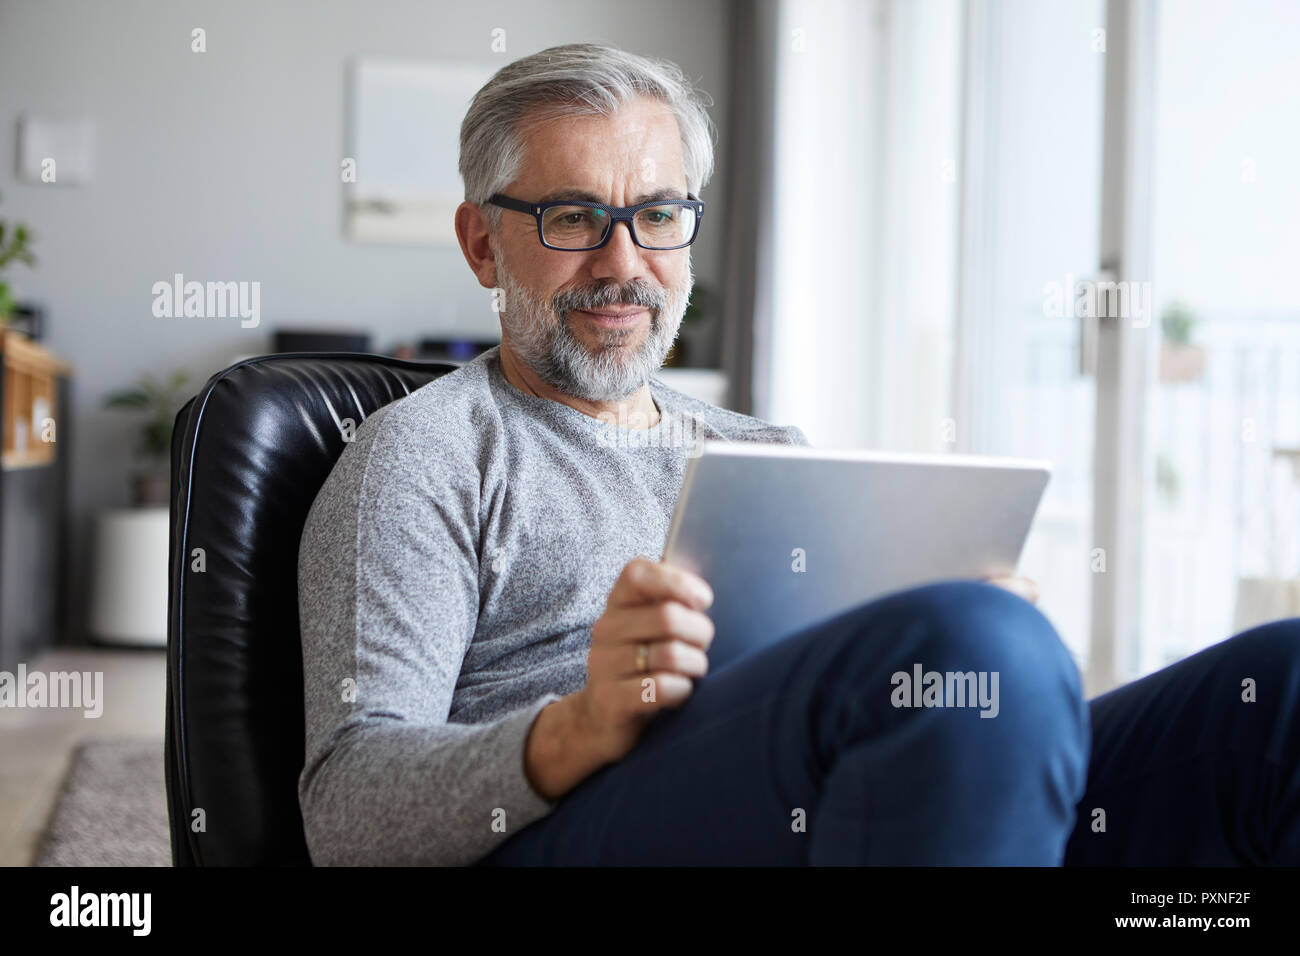 Portrait of mature man using tablet at home Stock Photo